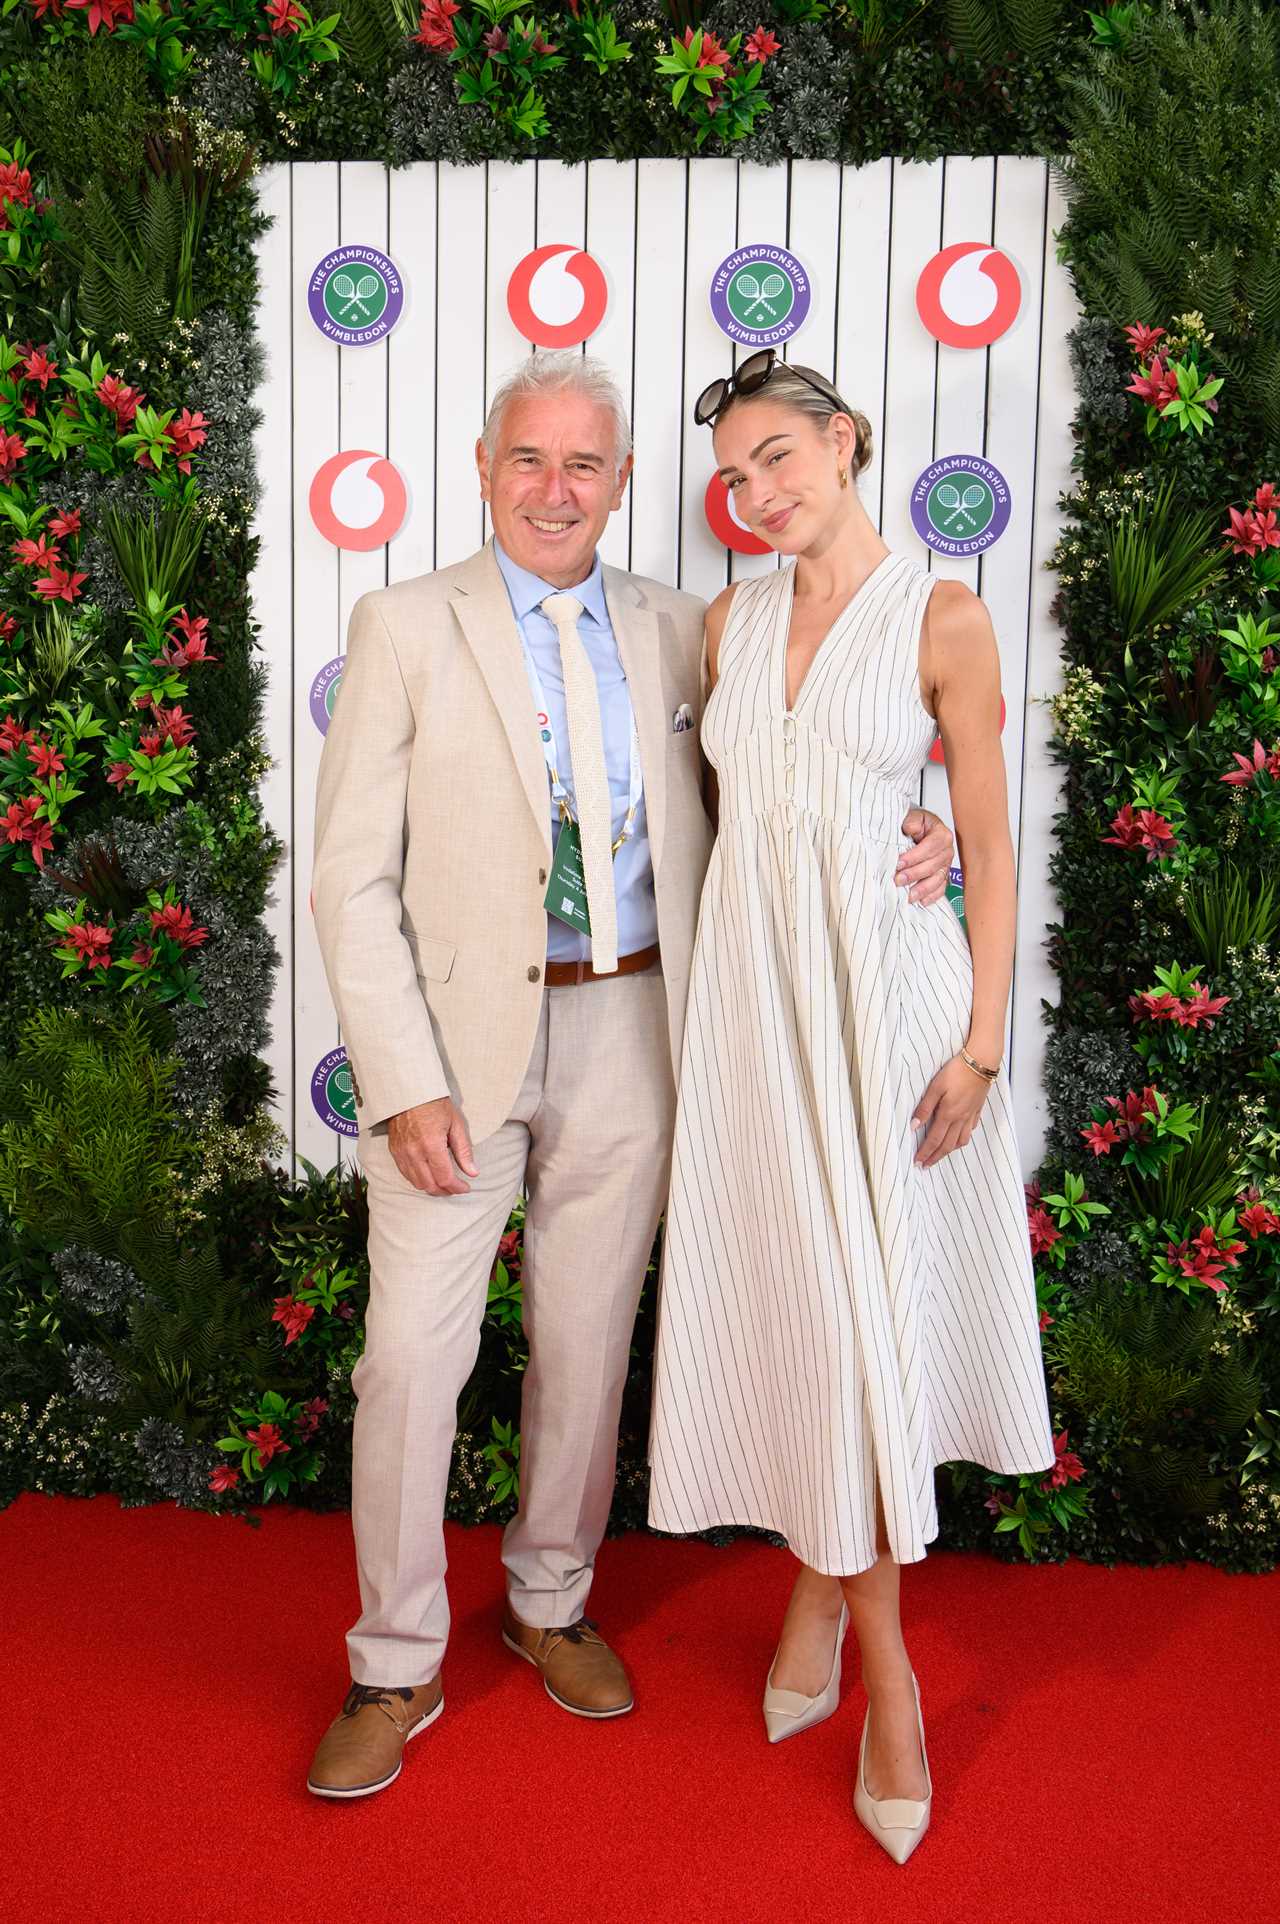 Zara McDermott sparks speculation at Wimbledon with father, amidst relationship drama with Sam Thompson